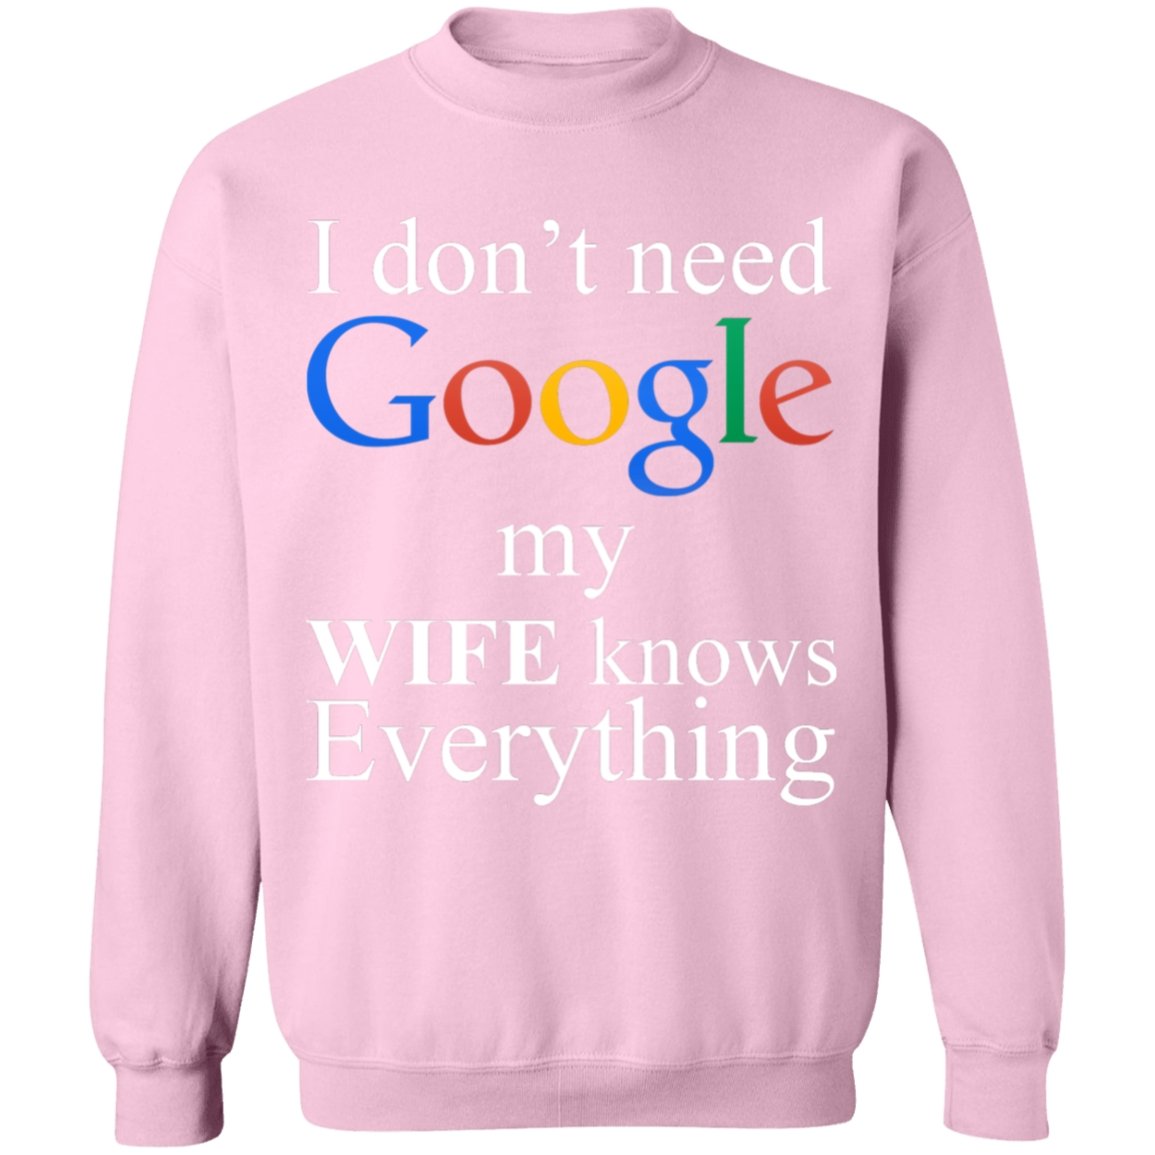 I Don't Need Google My Wife Knows Everything Sweatshirt | Apparel | american made, american merchandise, christmas gifts, gift for dad, gifts, gifts for christmas, gifts for men, google, google sweatshirt, made in usa, merchandise, sweatshirt, sweatshirts, usa, usa apparel, usa made | TageUnlimited